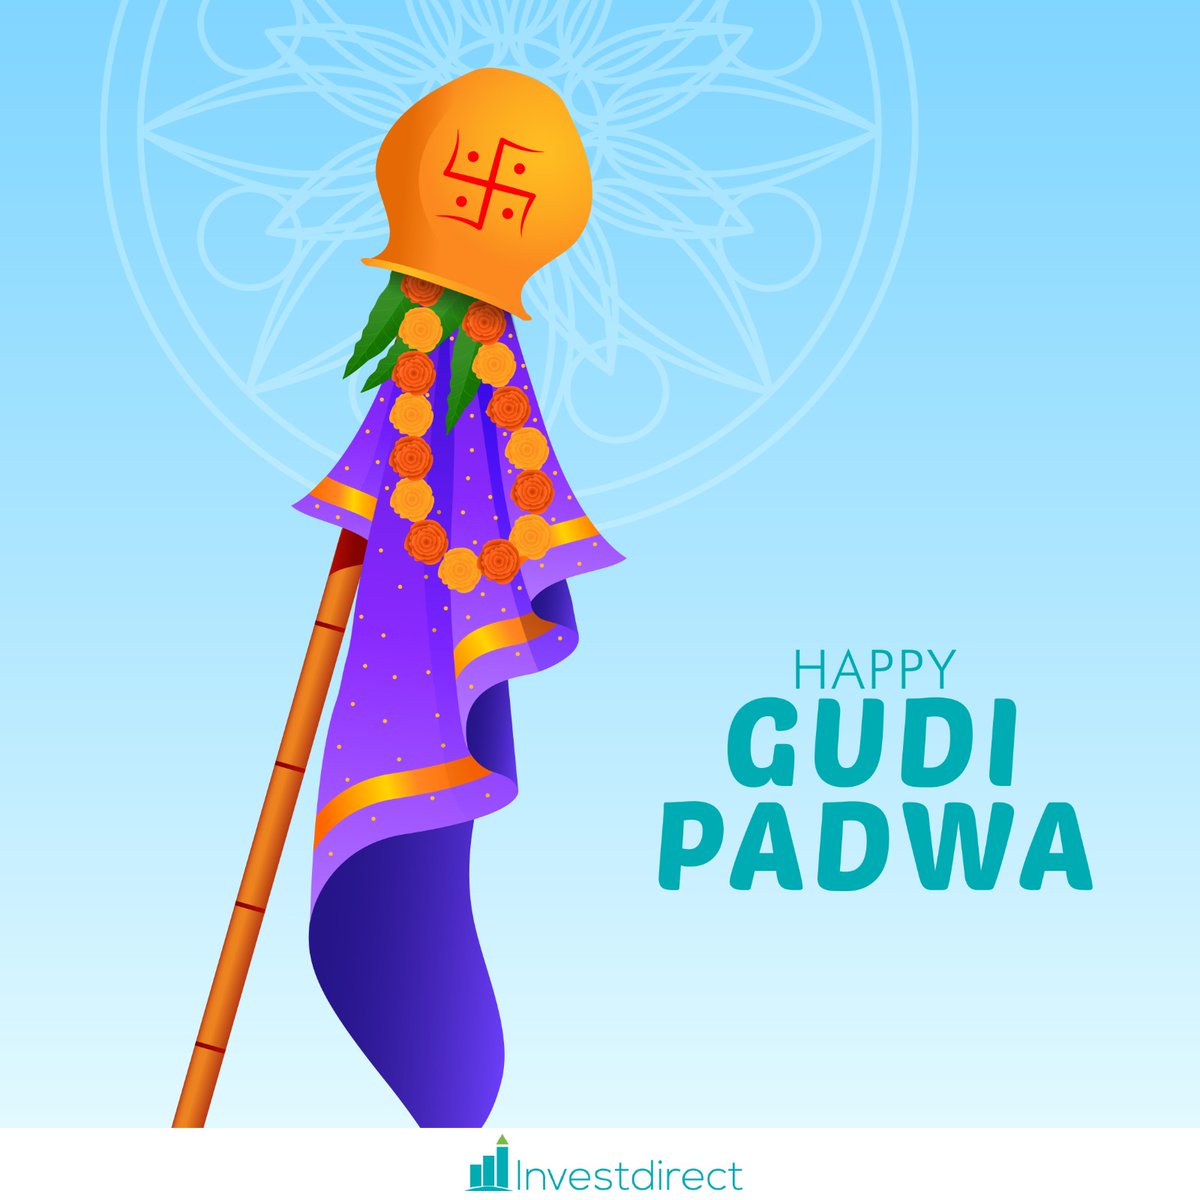 May this festival of beauty bring your way bright sparkles of contentment that stay forever and fill everyone's life with happiness & prosperity.

Wishing everyone a very Happy Gudi Padwa.

#GudiPadwa #Gudipadwawishes #gudipadwacelebration #gudipadwa2023